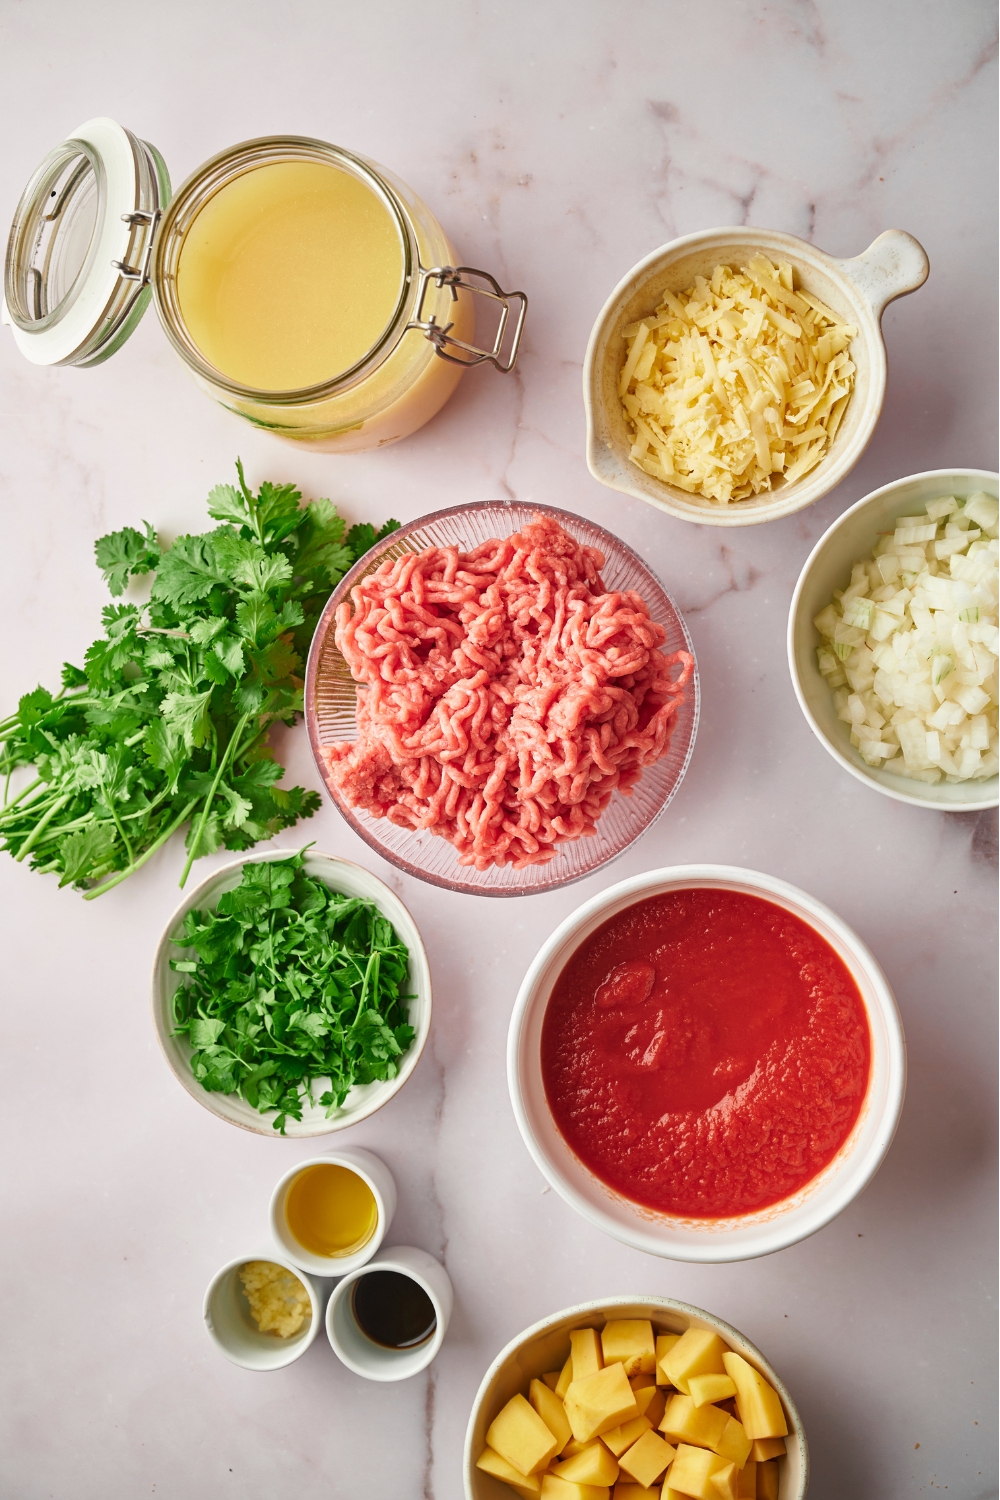 A bowl of ground beef, a glass jar of broth, a bowl of shredded cheese, a bowl of cilantro, a bowl of crushed tomatoes, and part of a bowl of potatoes.